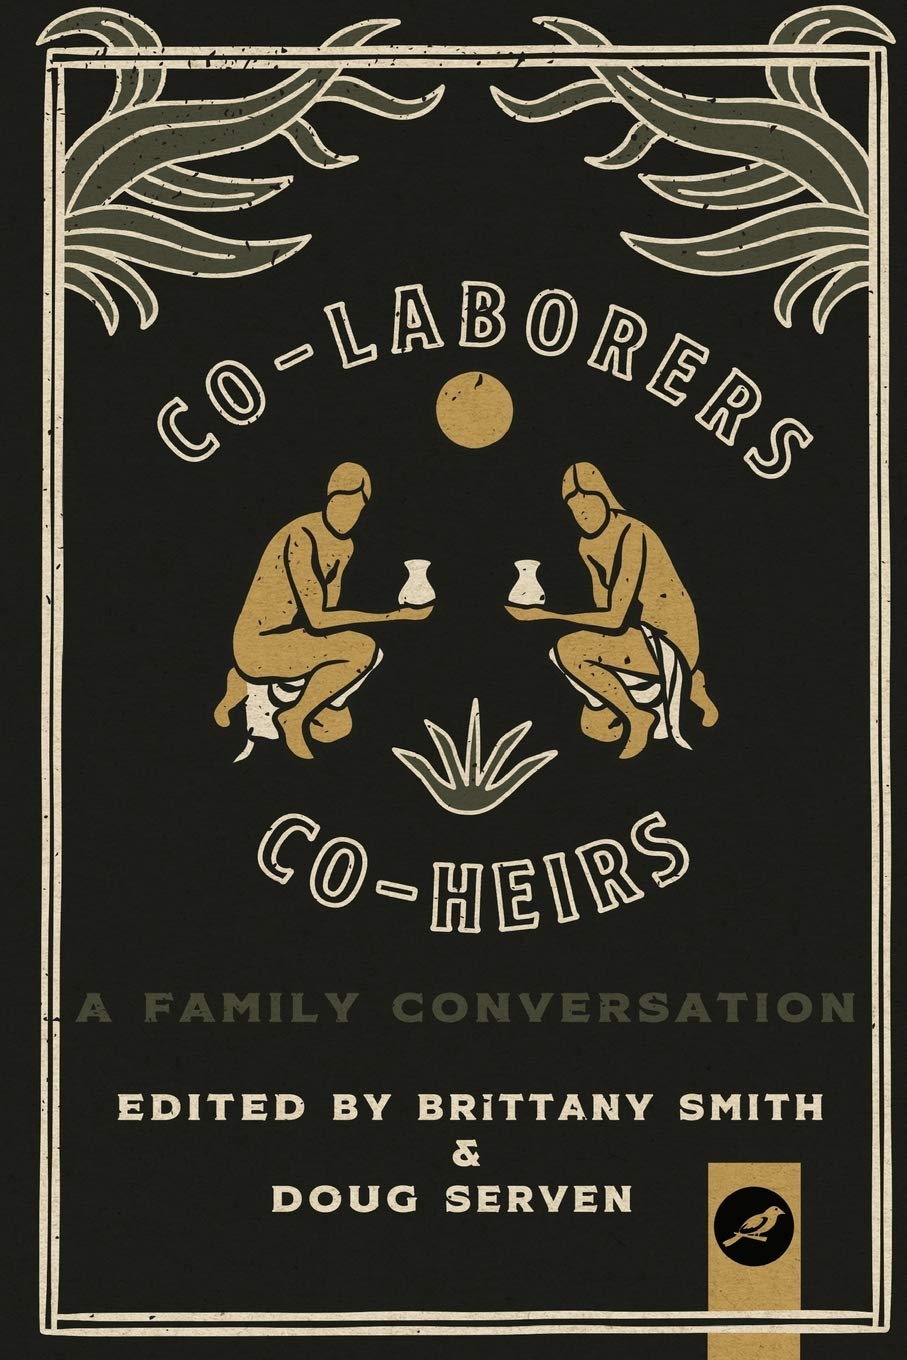 Co-Laborers Co-Heirs edited by Brittany Smith & Doug Serven